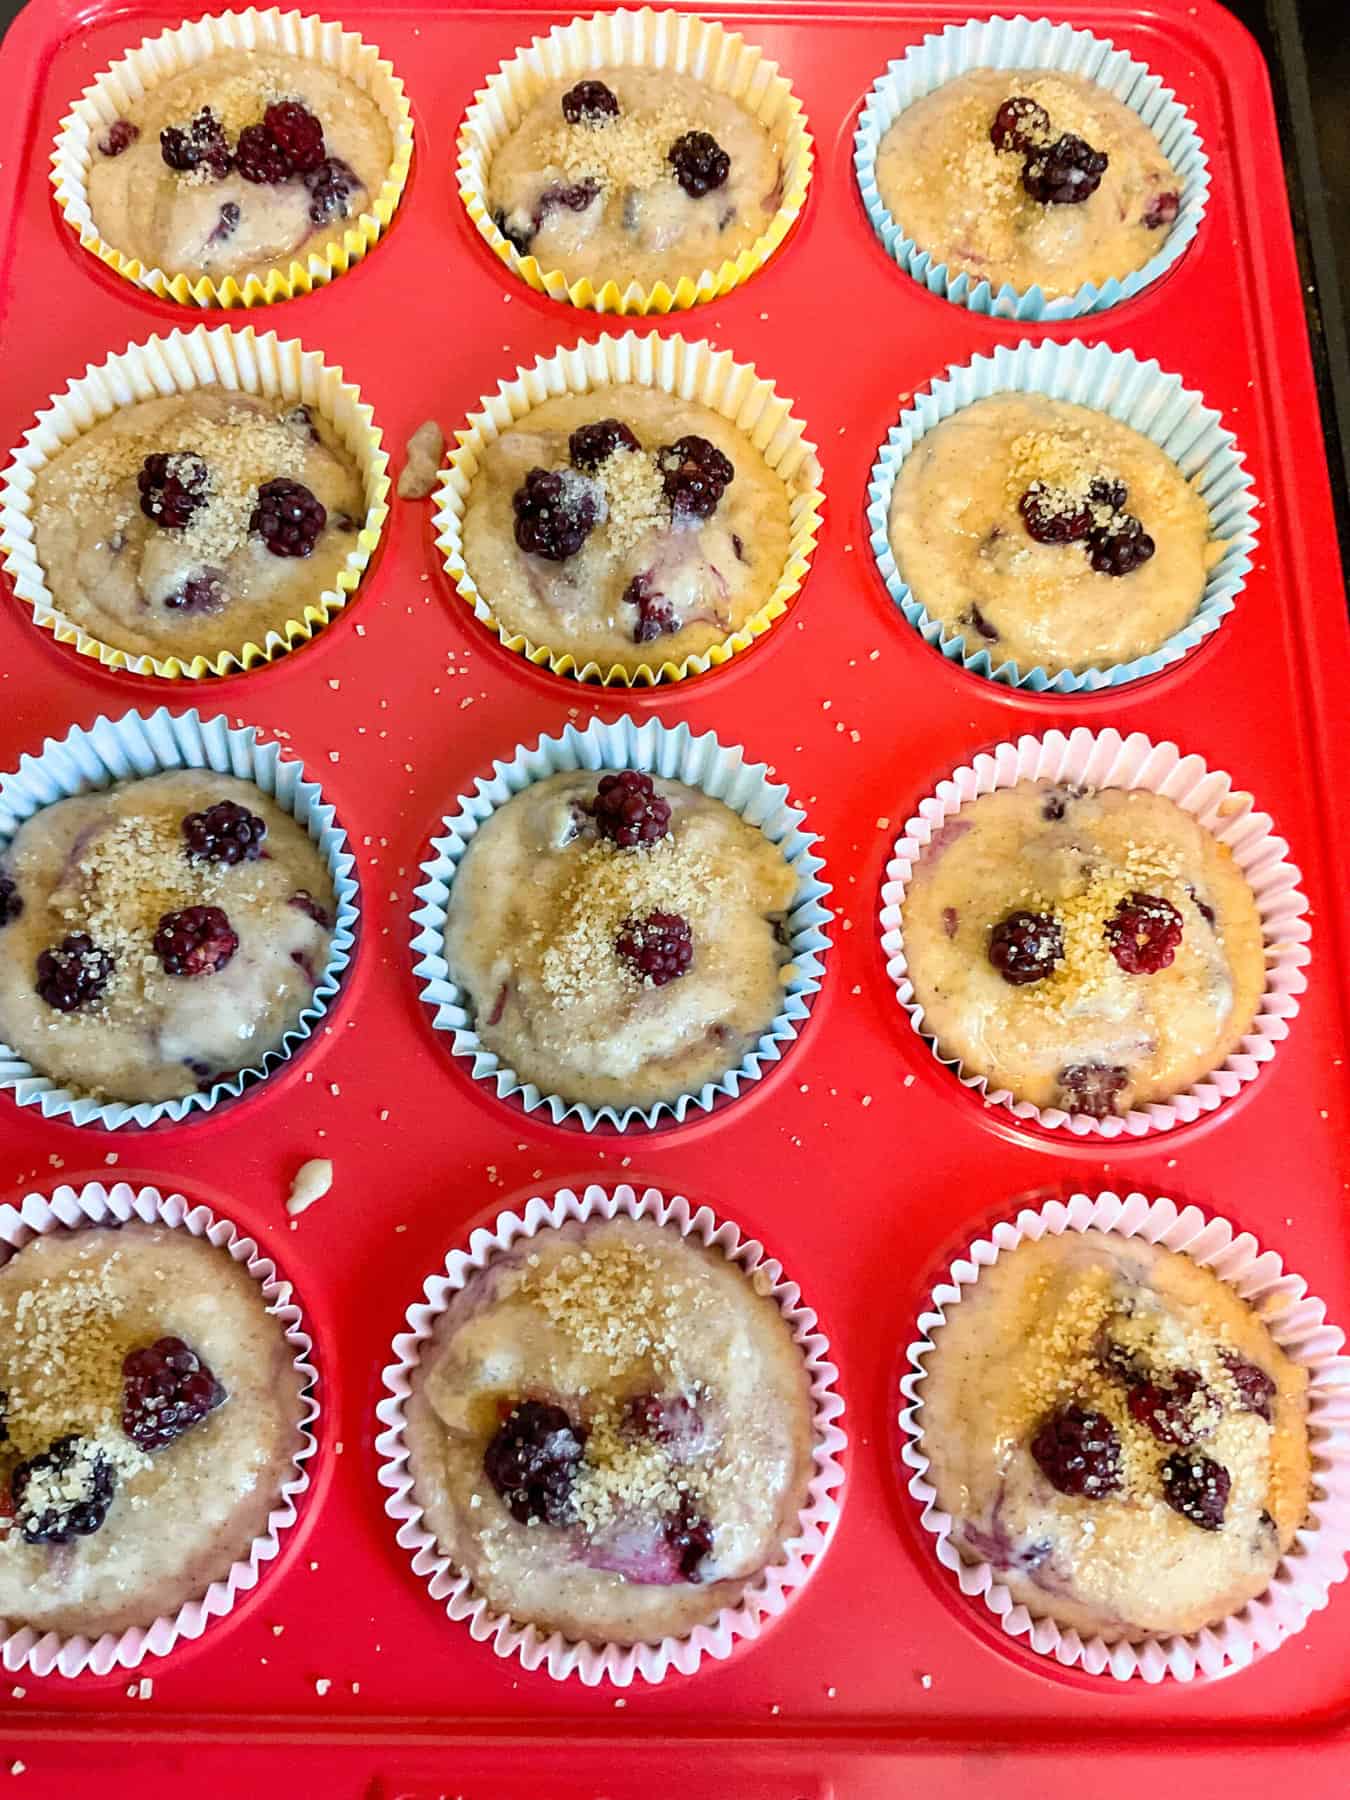 Bramble muffin cups filled with mixture, topped with extra brambles and sprinkled with sugar.